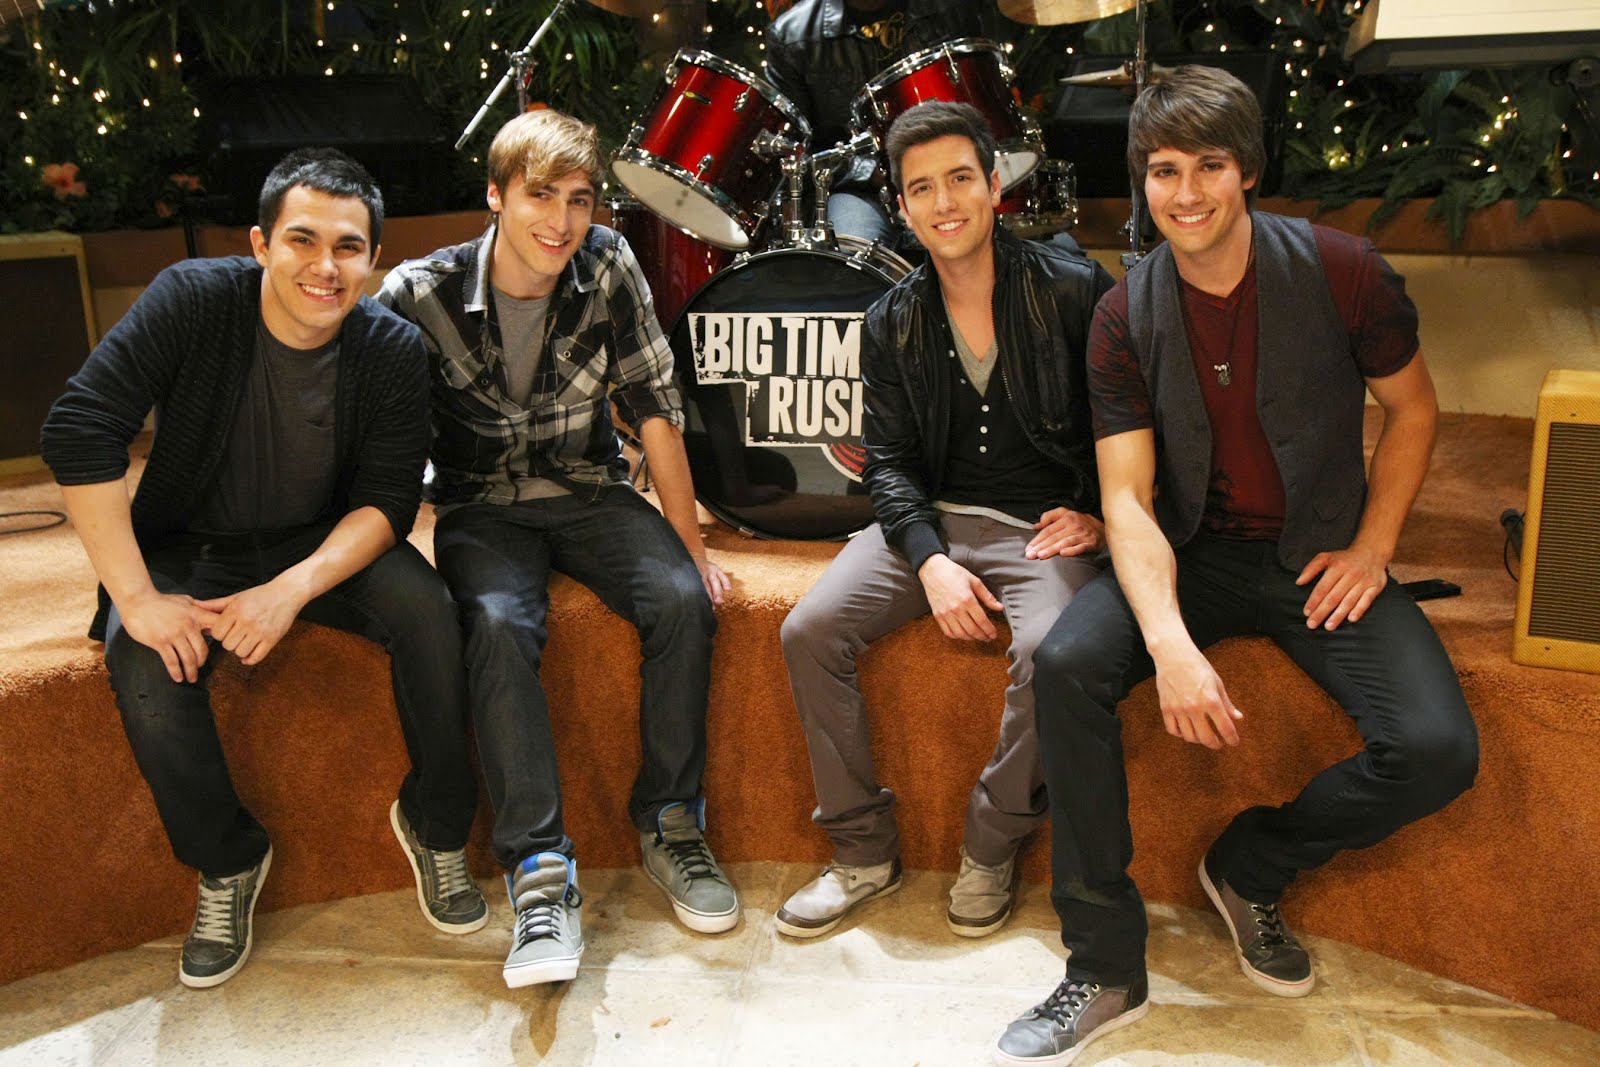 UK Music Channel The Vault To Air Special "Big Time Rush" Show &q...